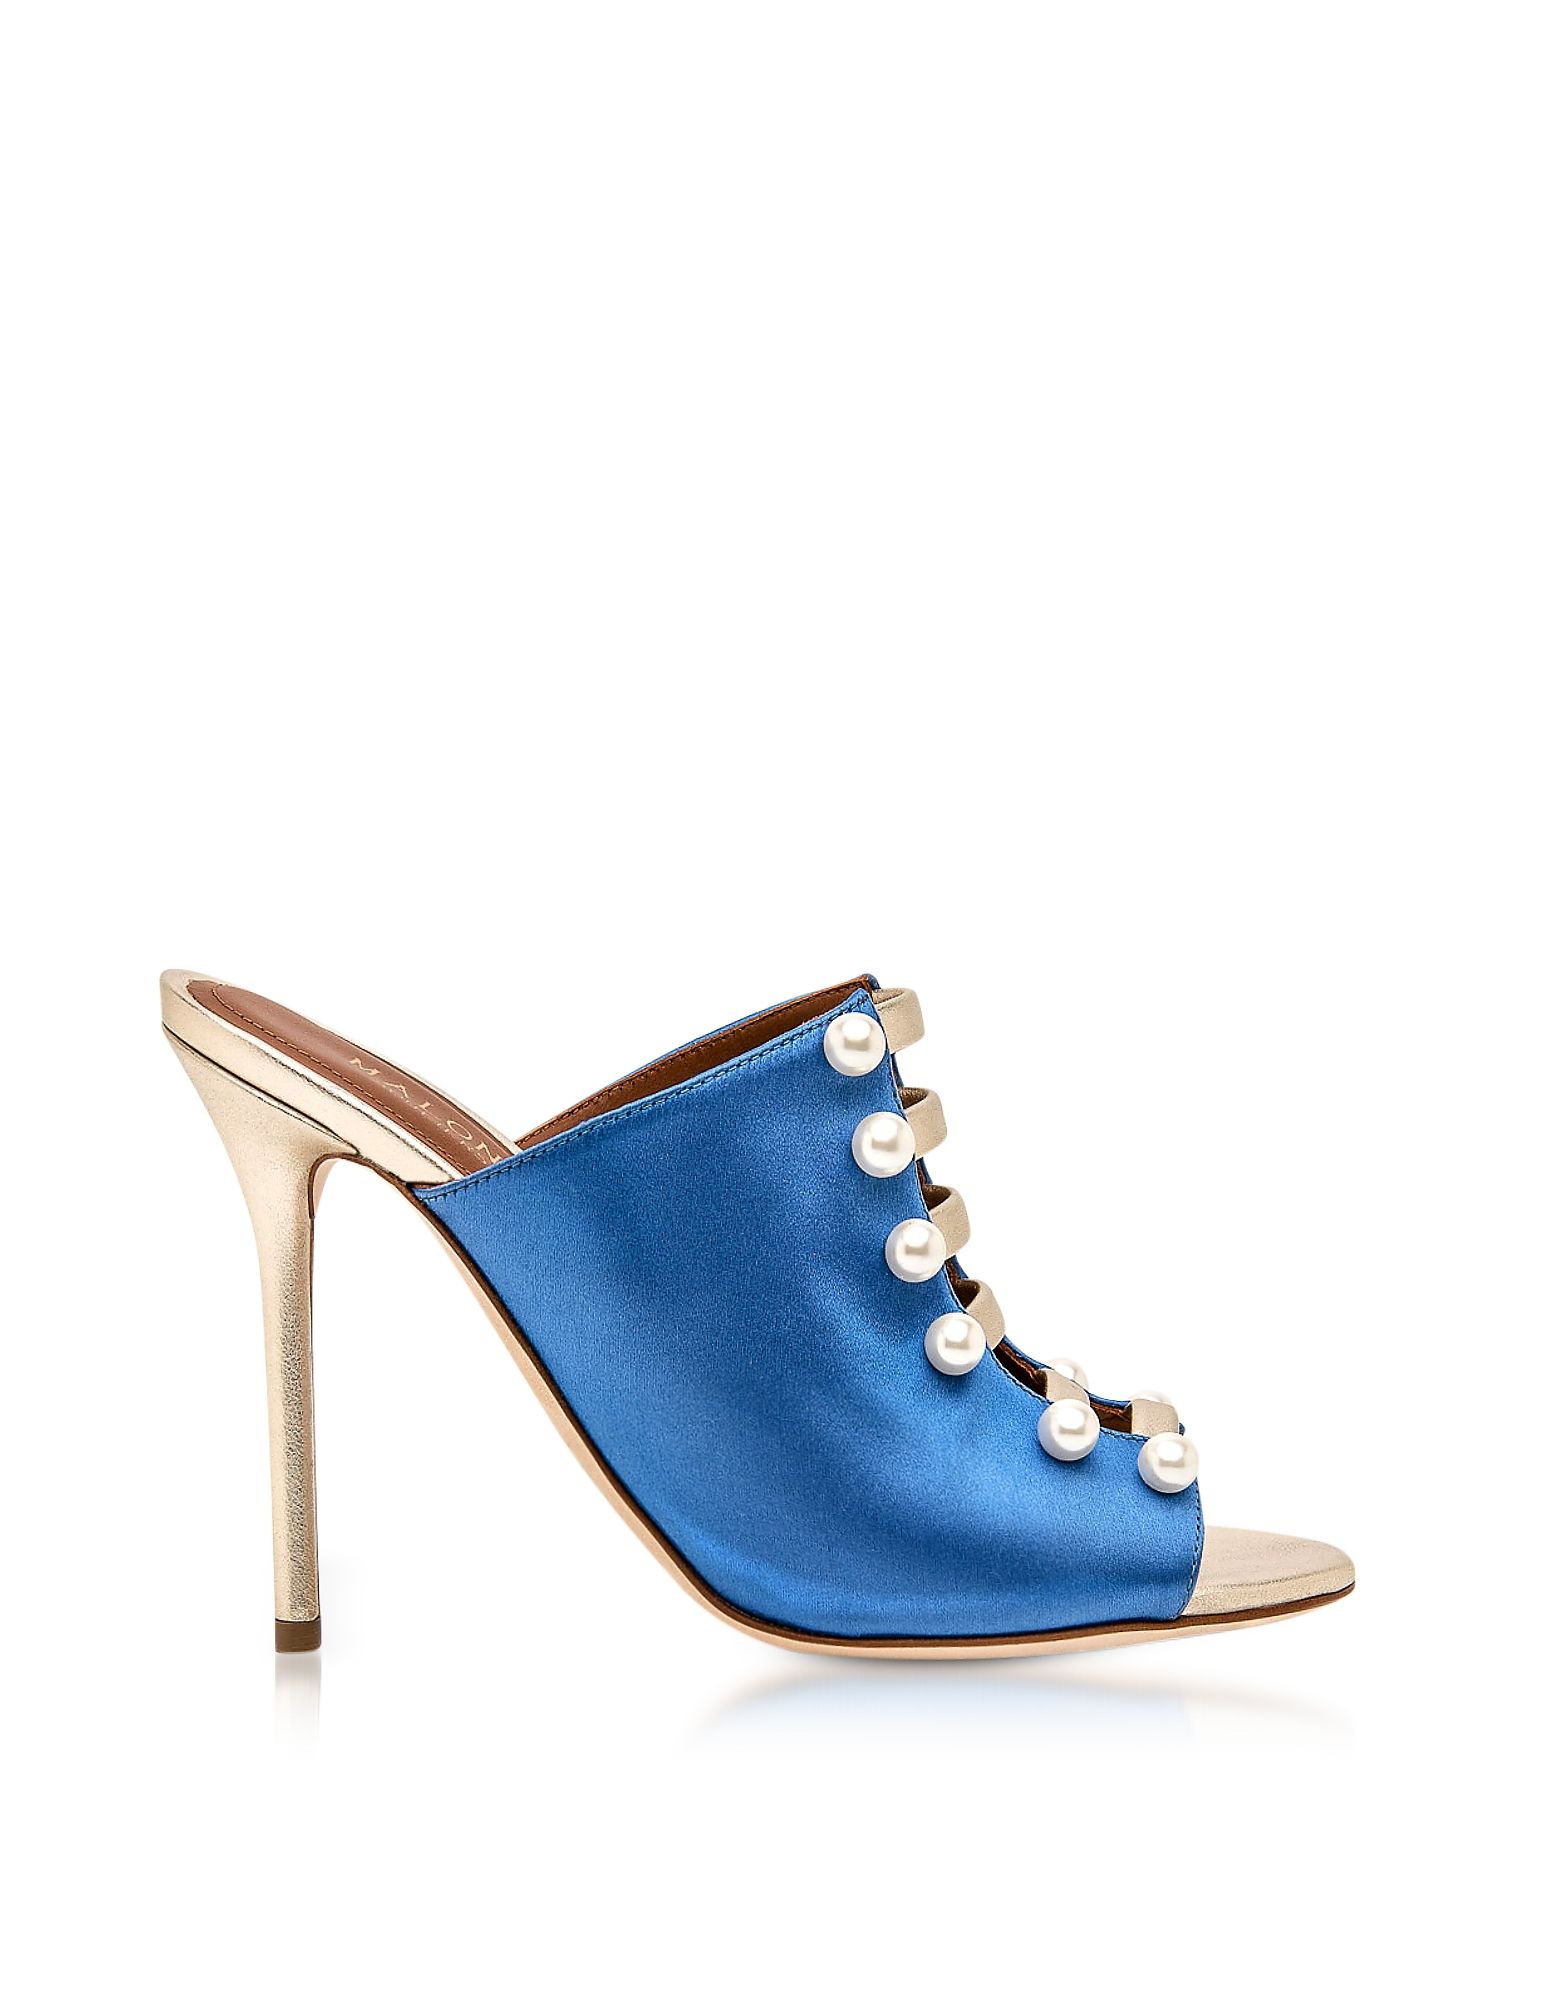 Malone Souliers Designer Shoes, Zada Blue and Platinum Satin High Heel Mules | Forzieri US & CA